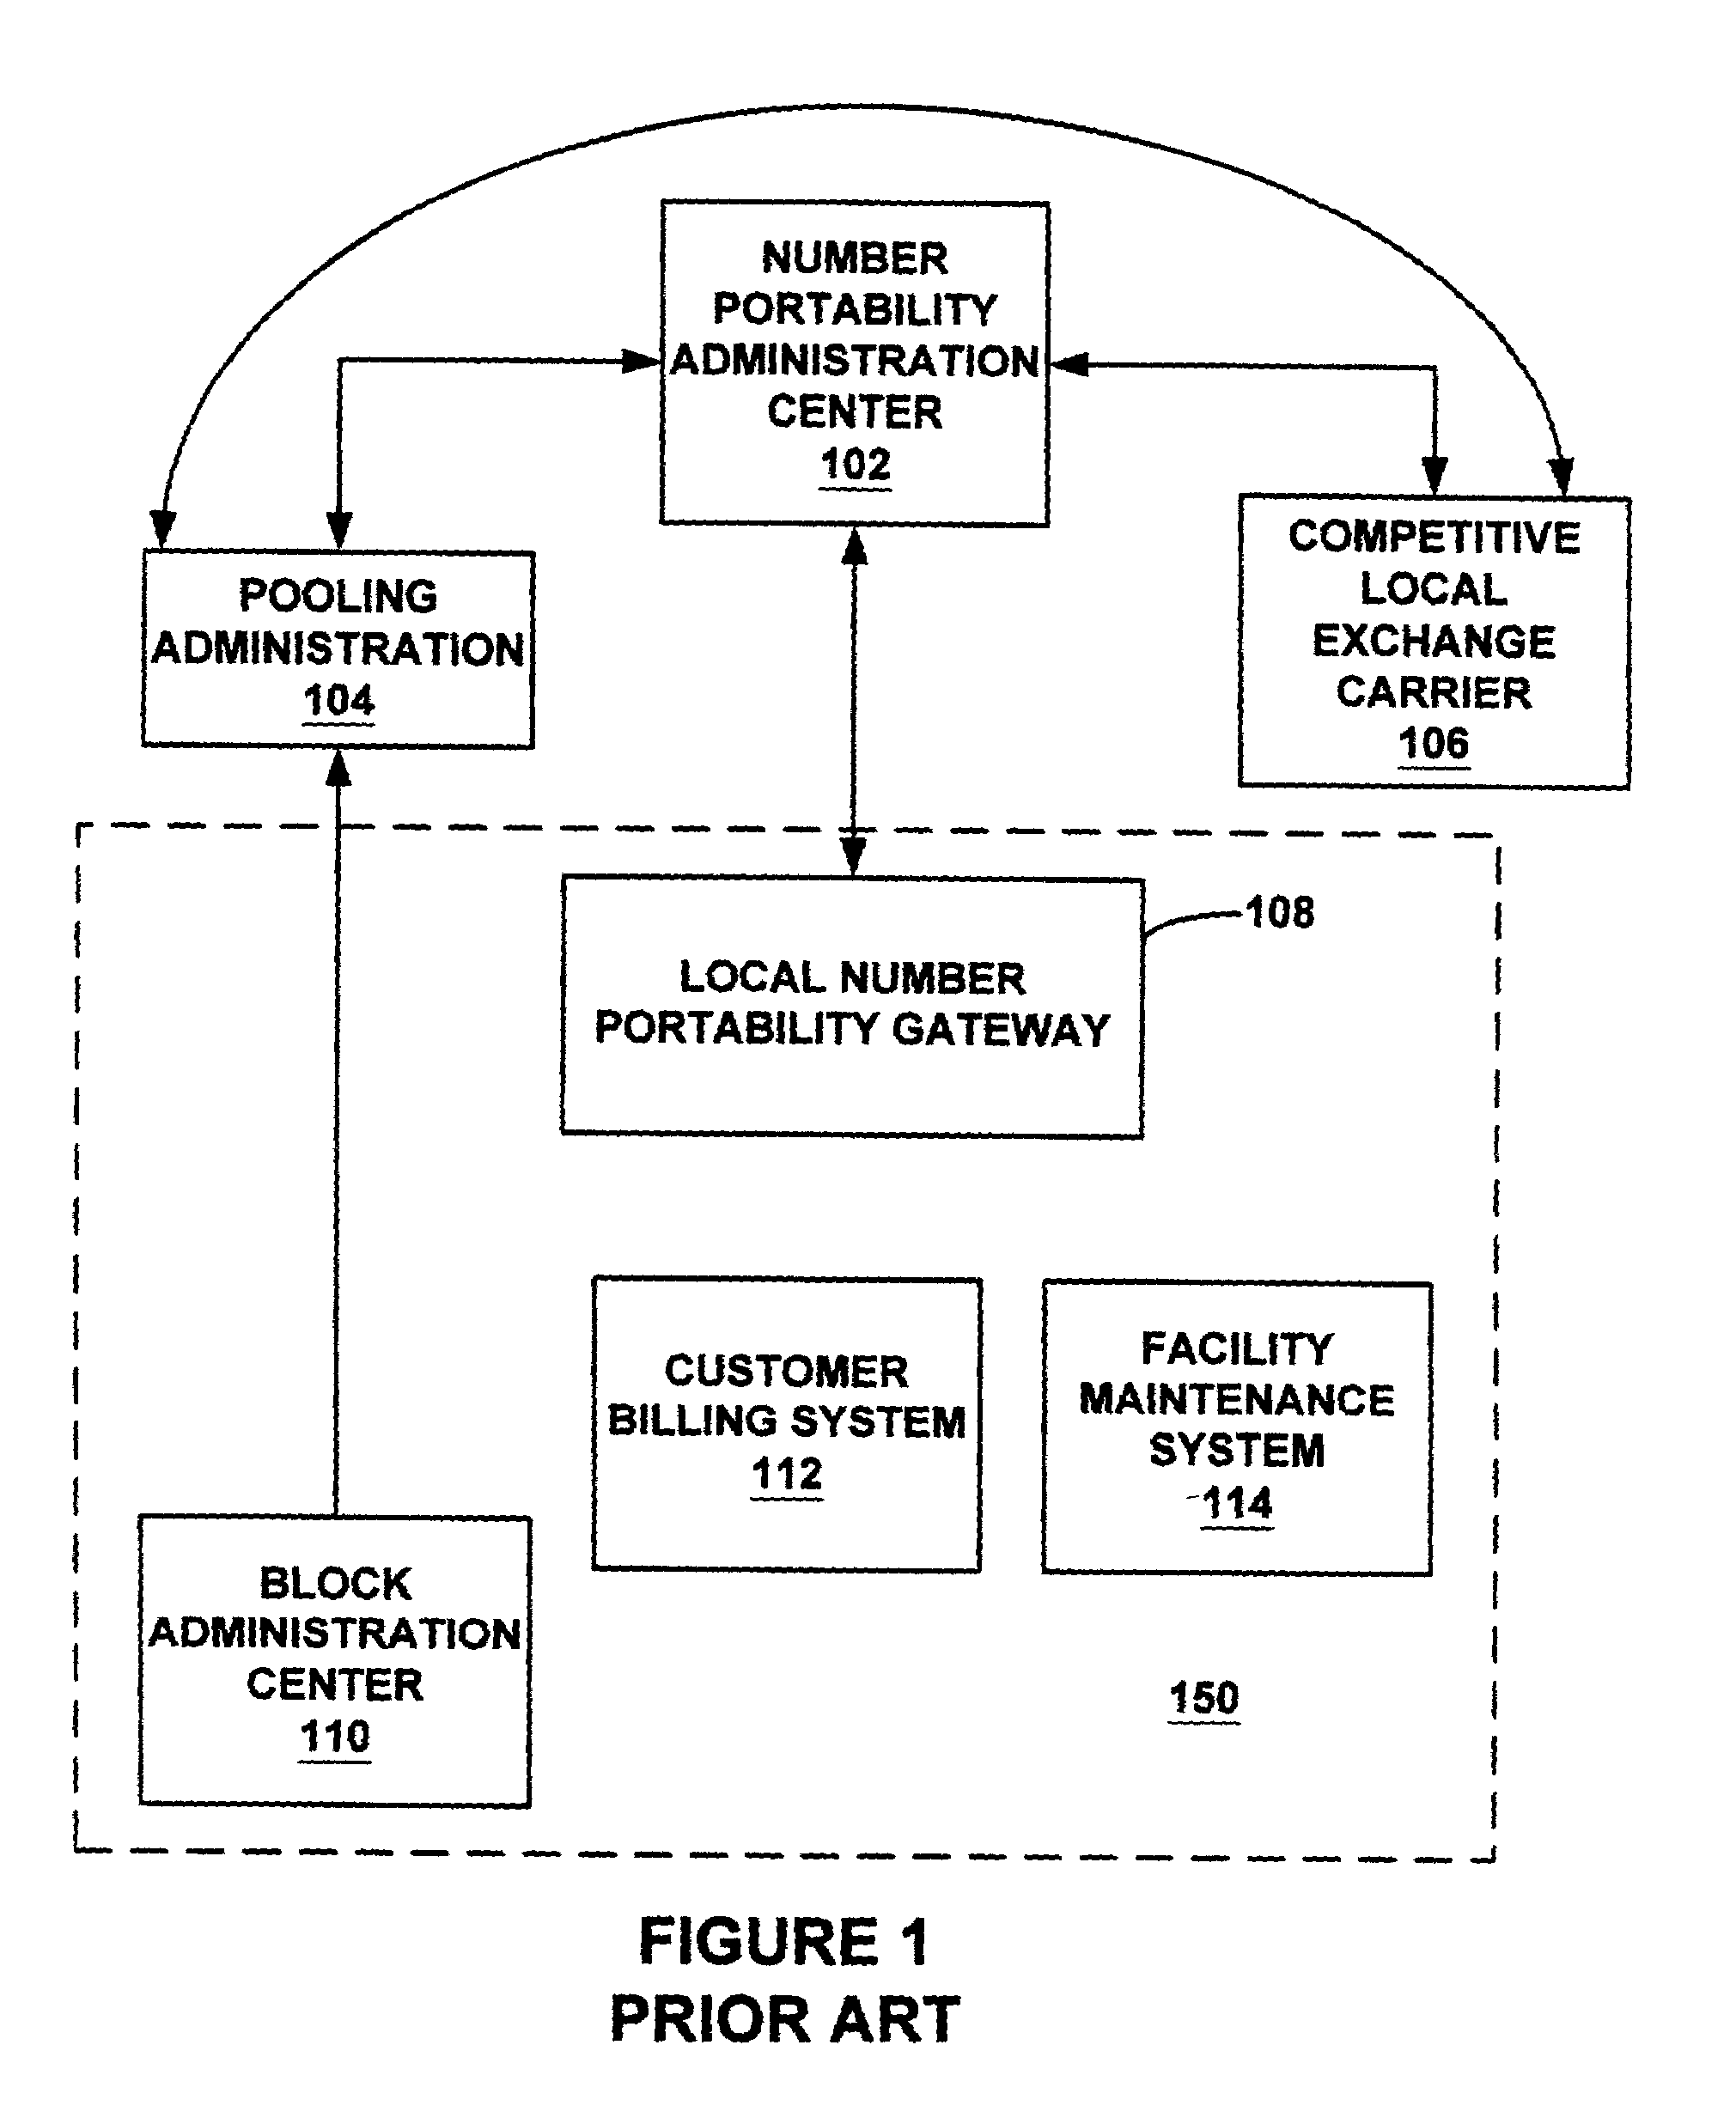 System and method for identifying contaminated telephone numbers and correct LRN under number pooling